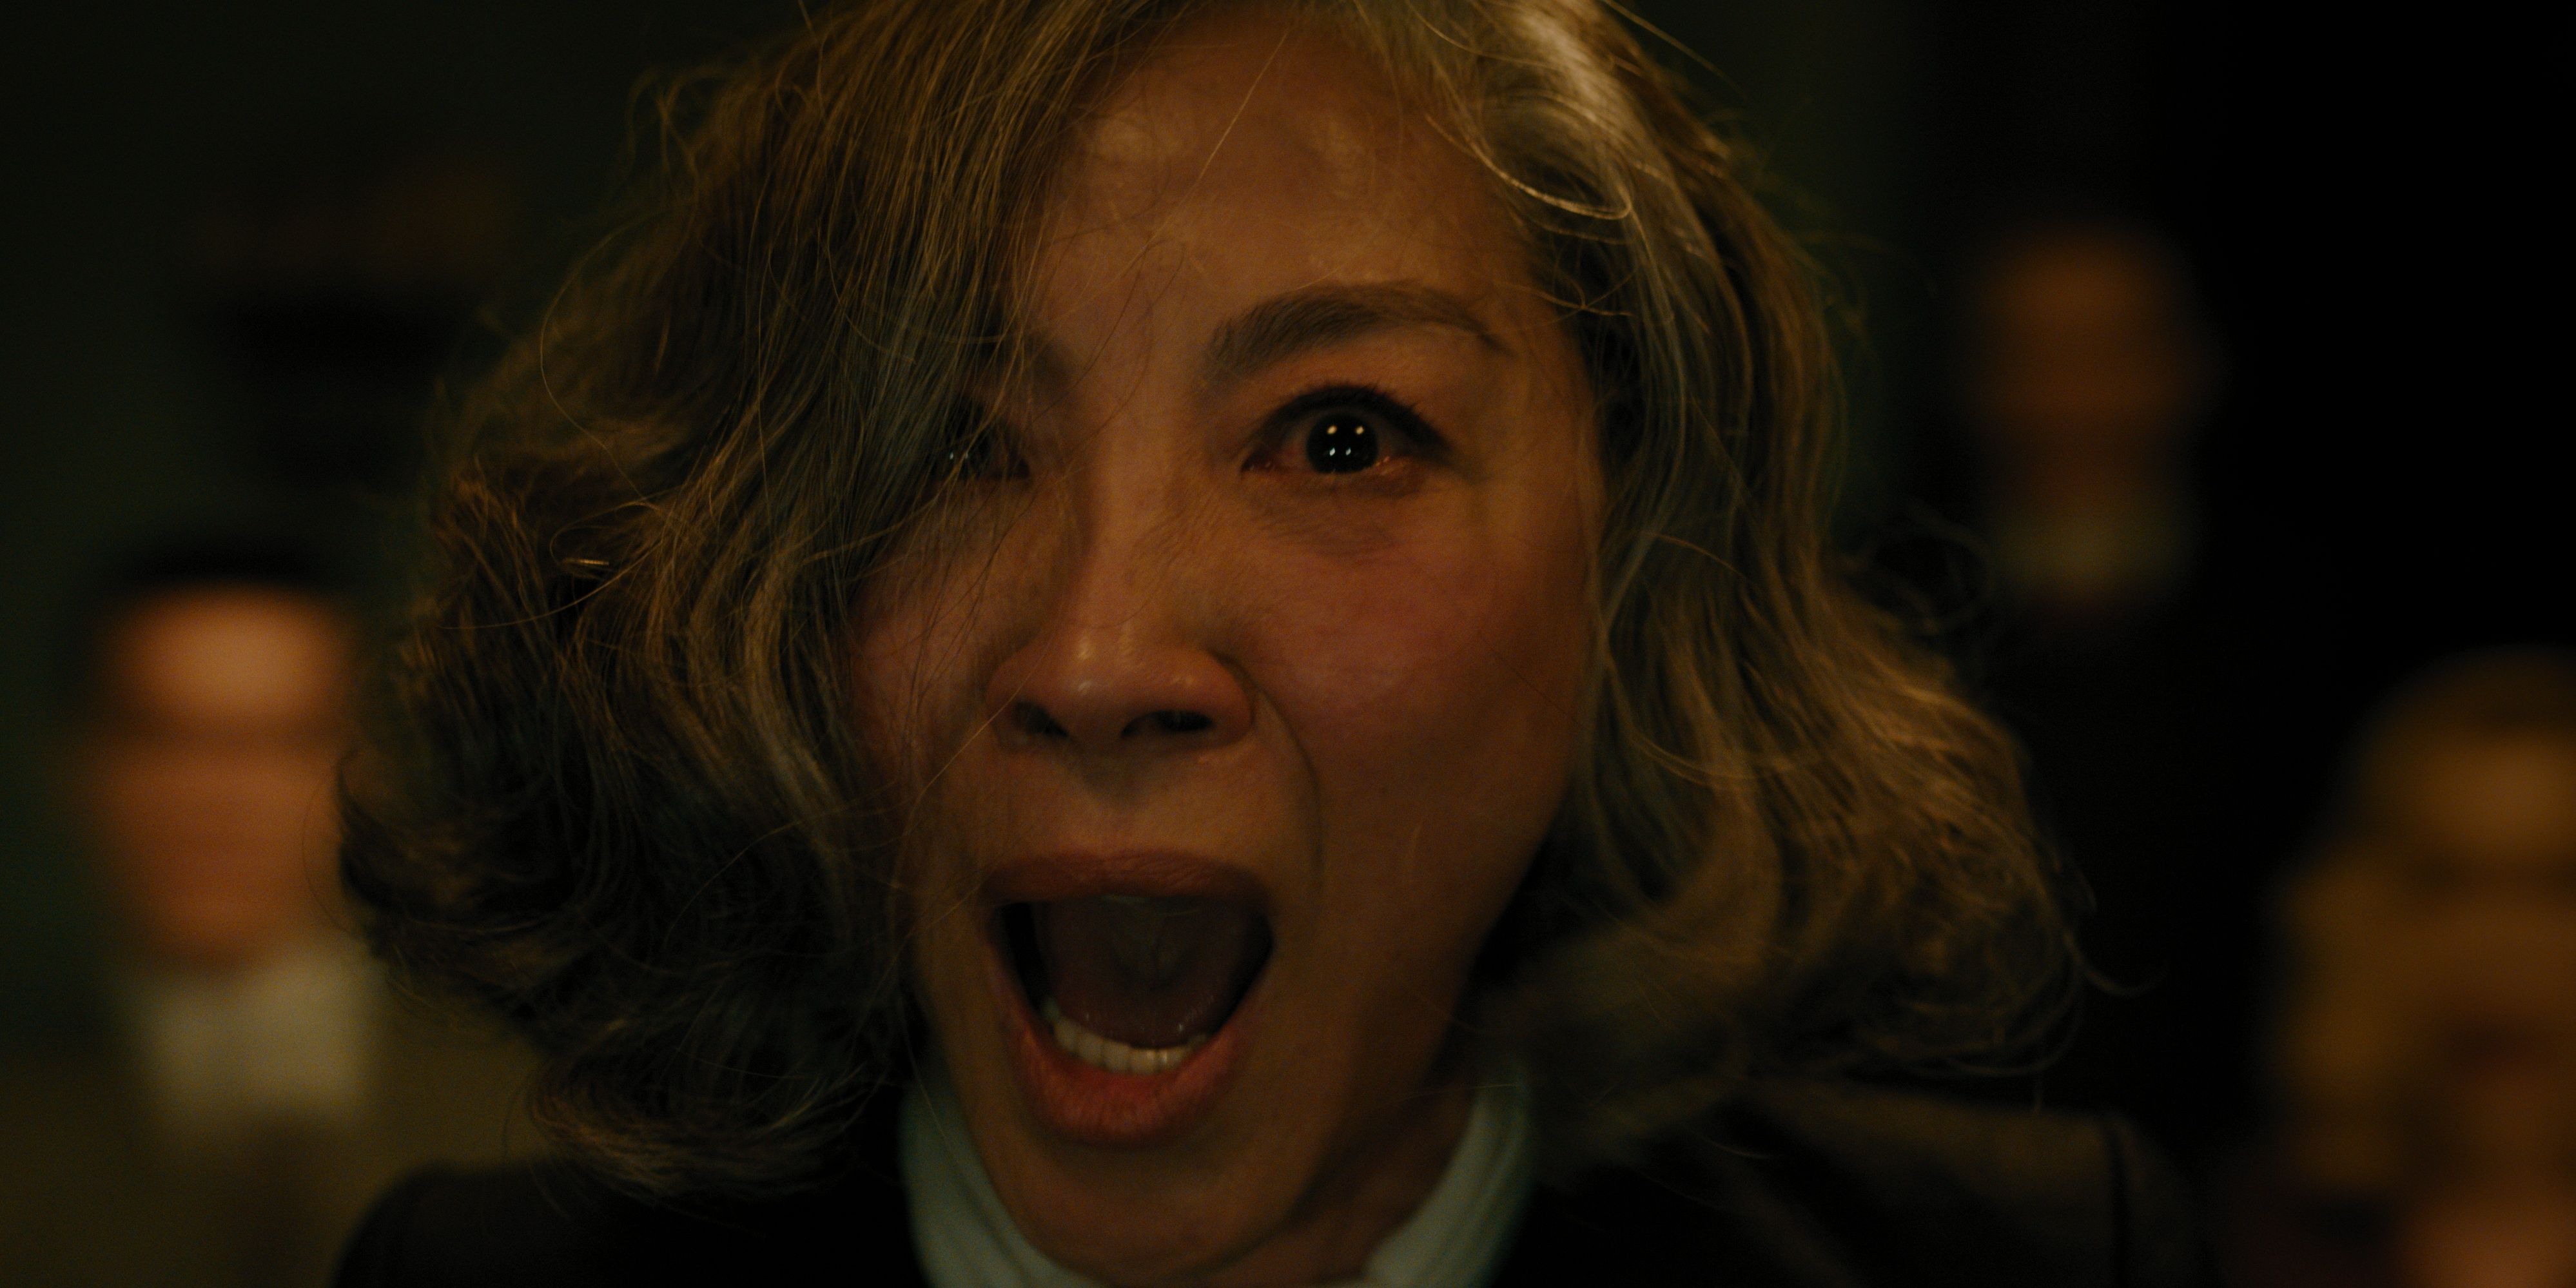 michelle yeoh in a haunting in venice Cropped